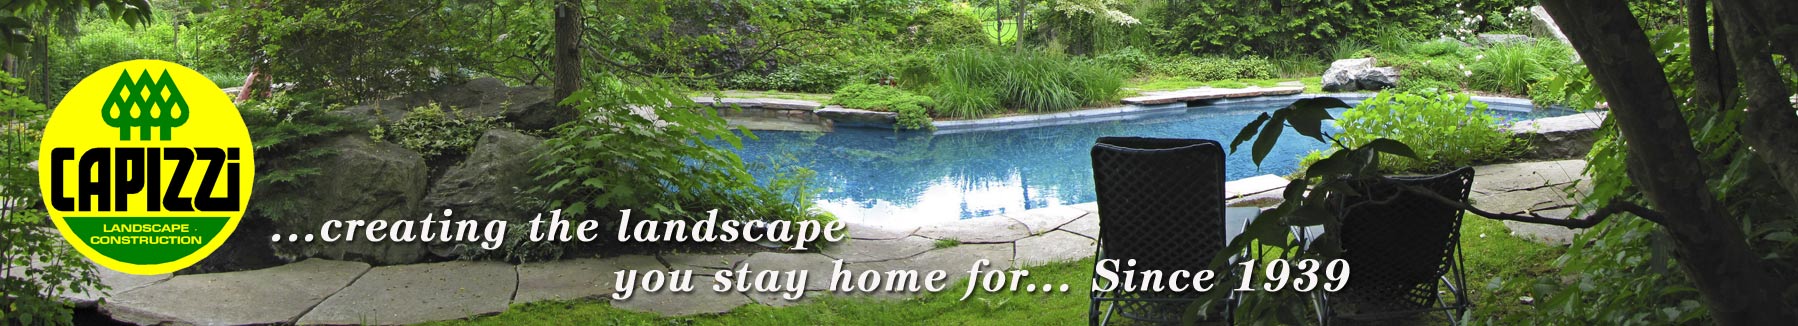 Capizzi Landscaping. Creating the landscape you stay home for since 1939.